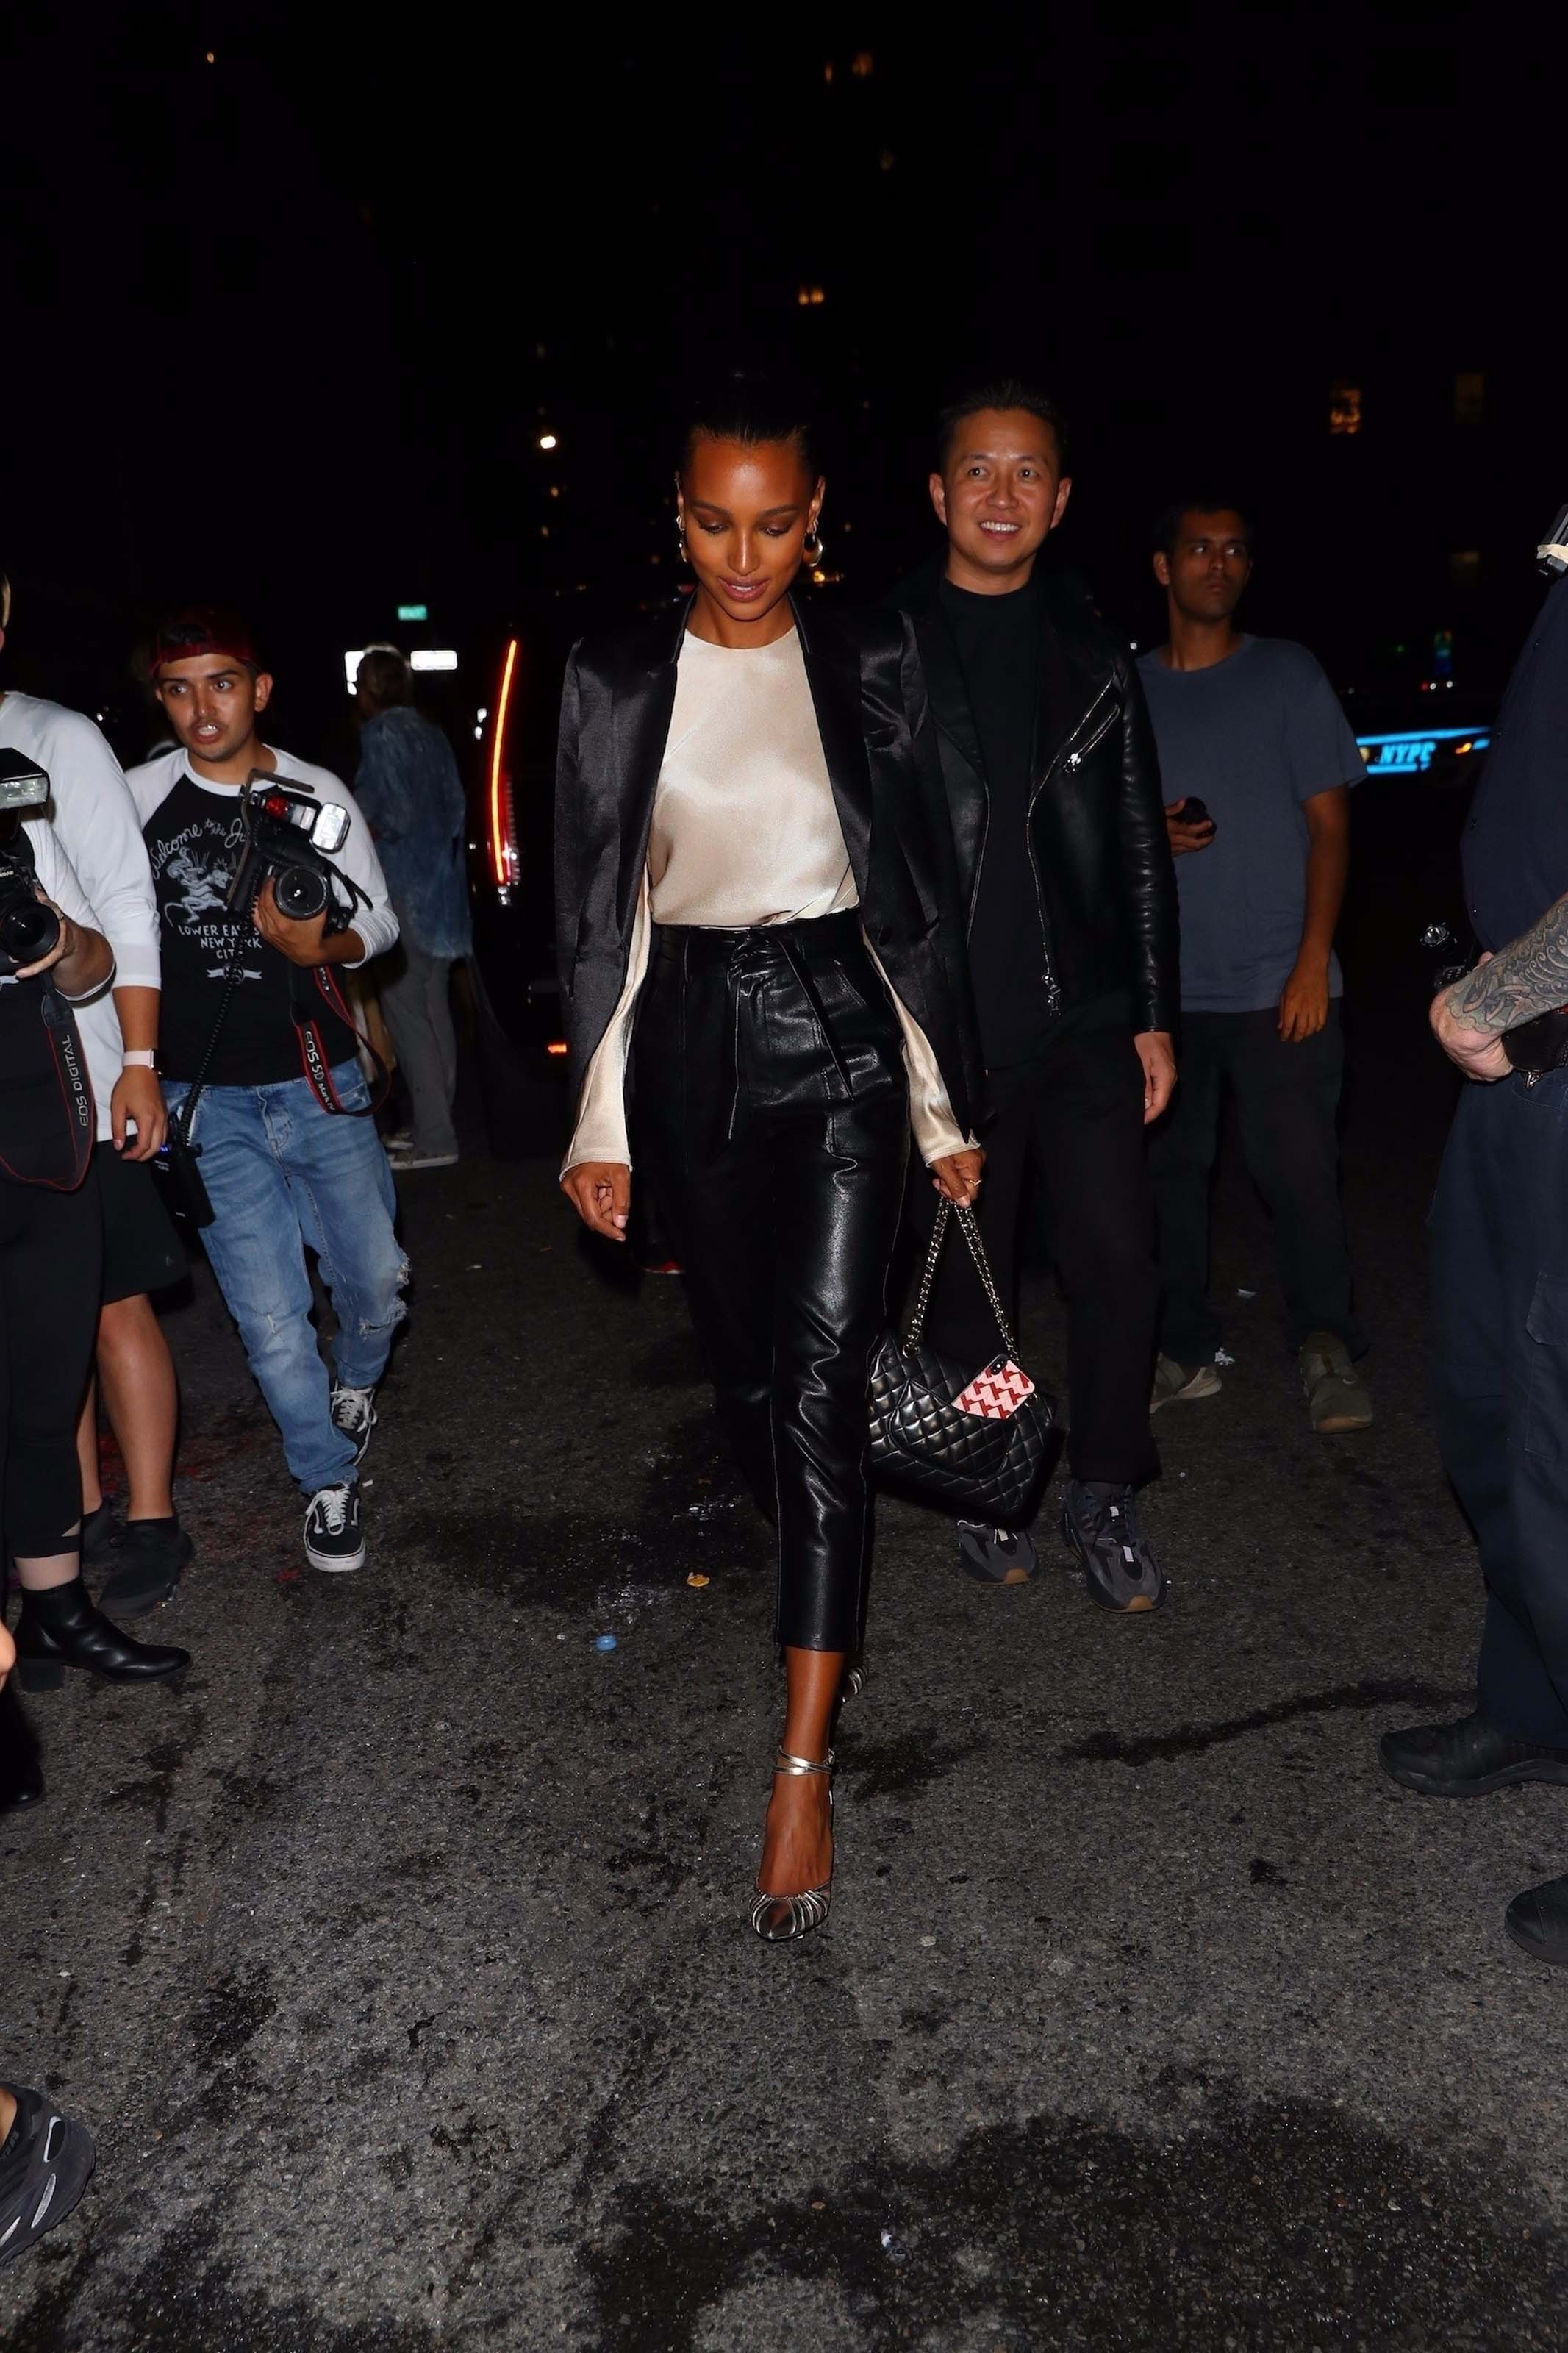 Jasmine Tookes attends Rihanna’s afterparty